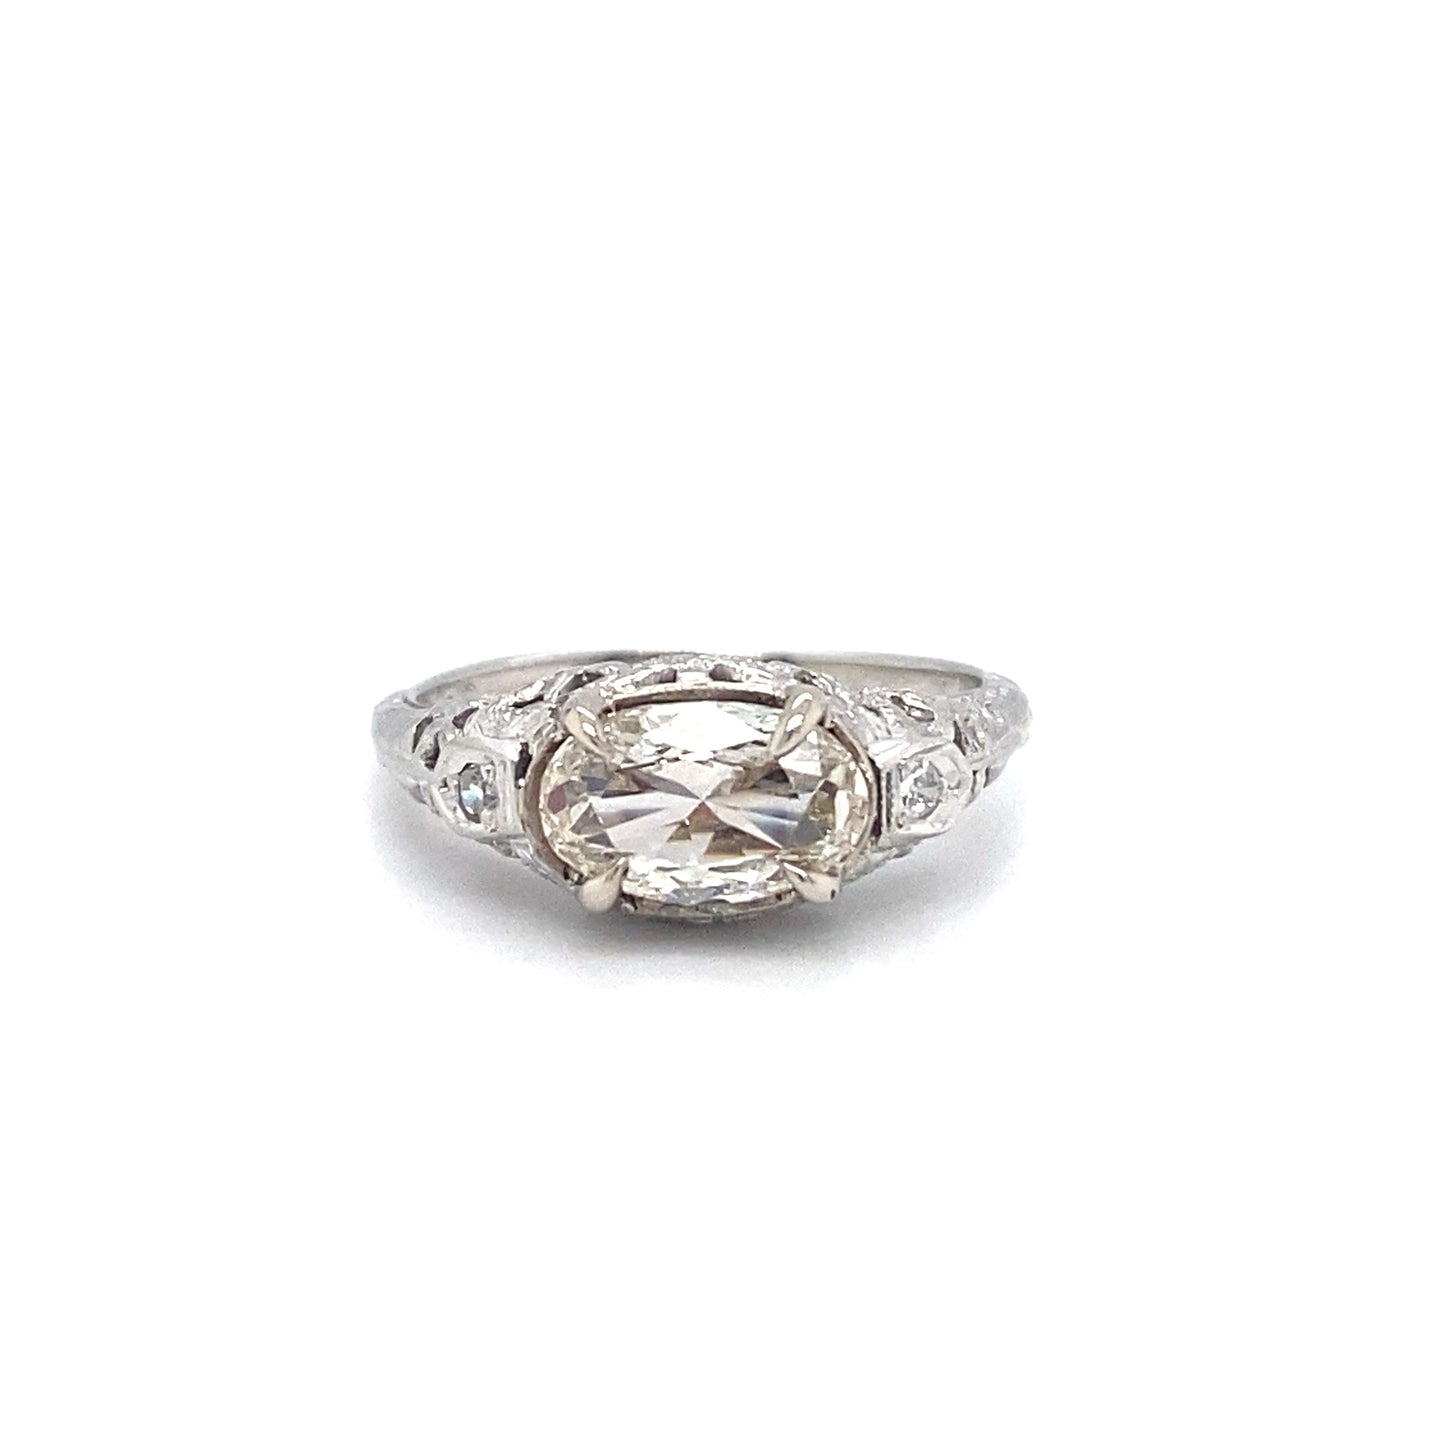 Circa 1920s Art Deco 1.09 Carat Oval Diamond Engagement Ring in 18K White Gold